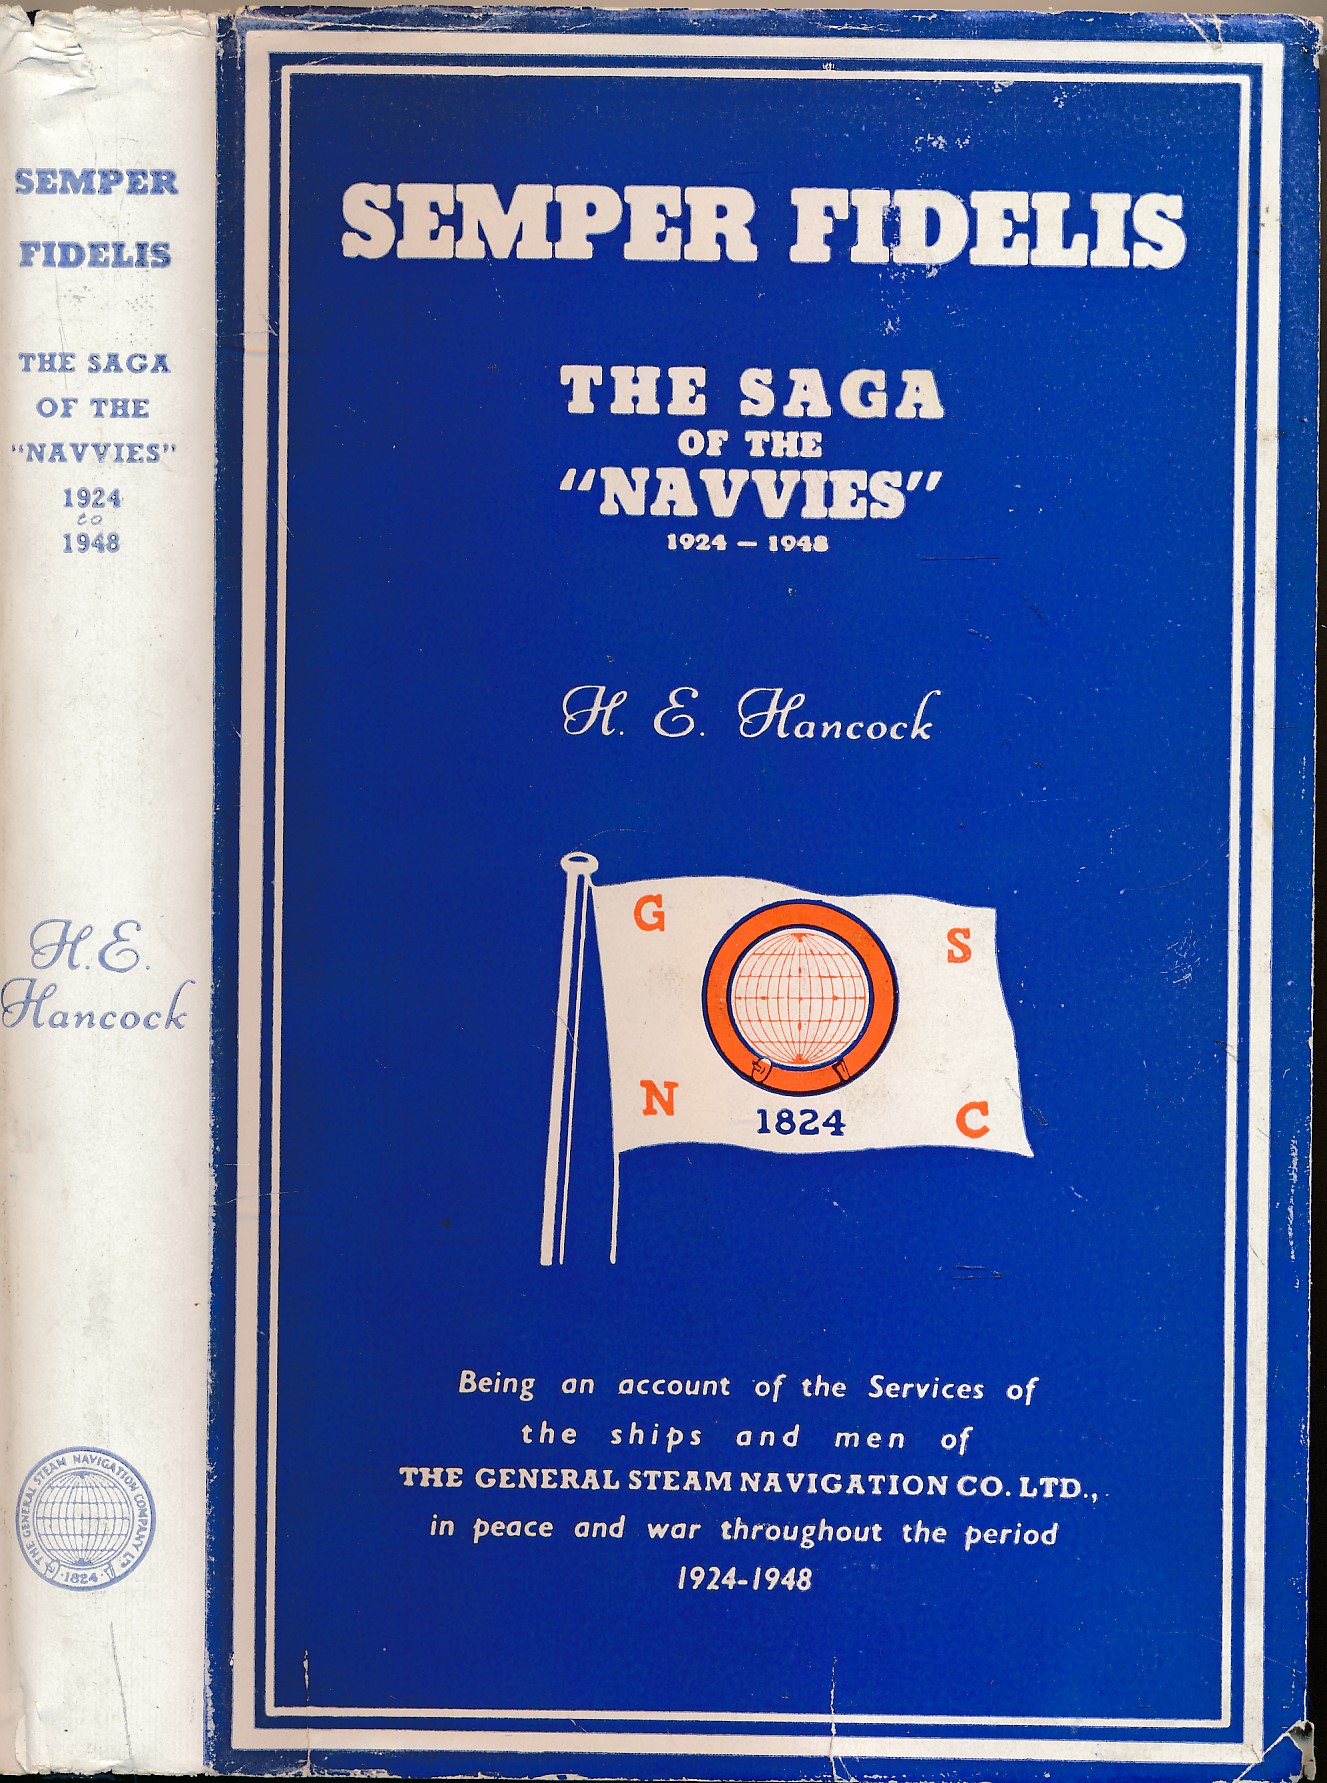 Semper Fidelis: The Saga of the "Navvies", 1924-1948.